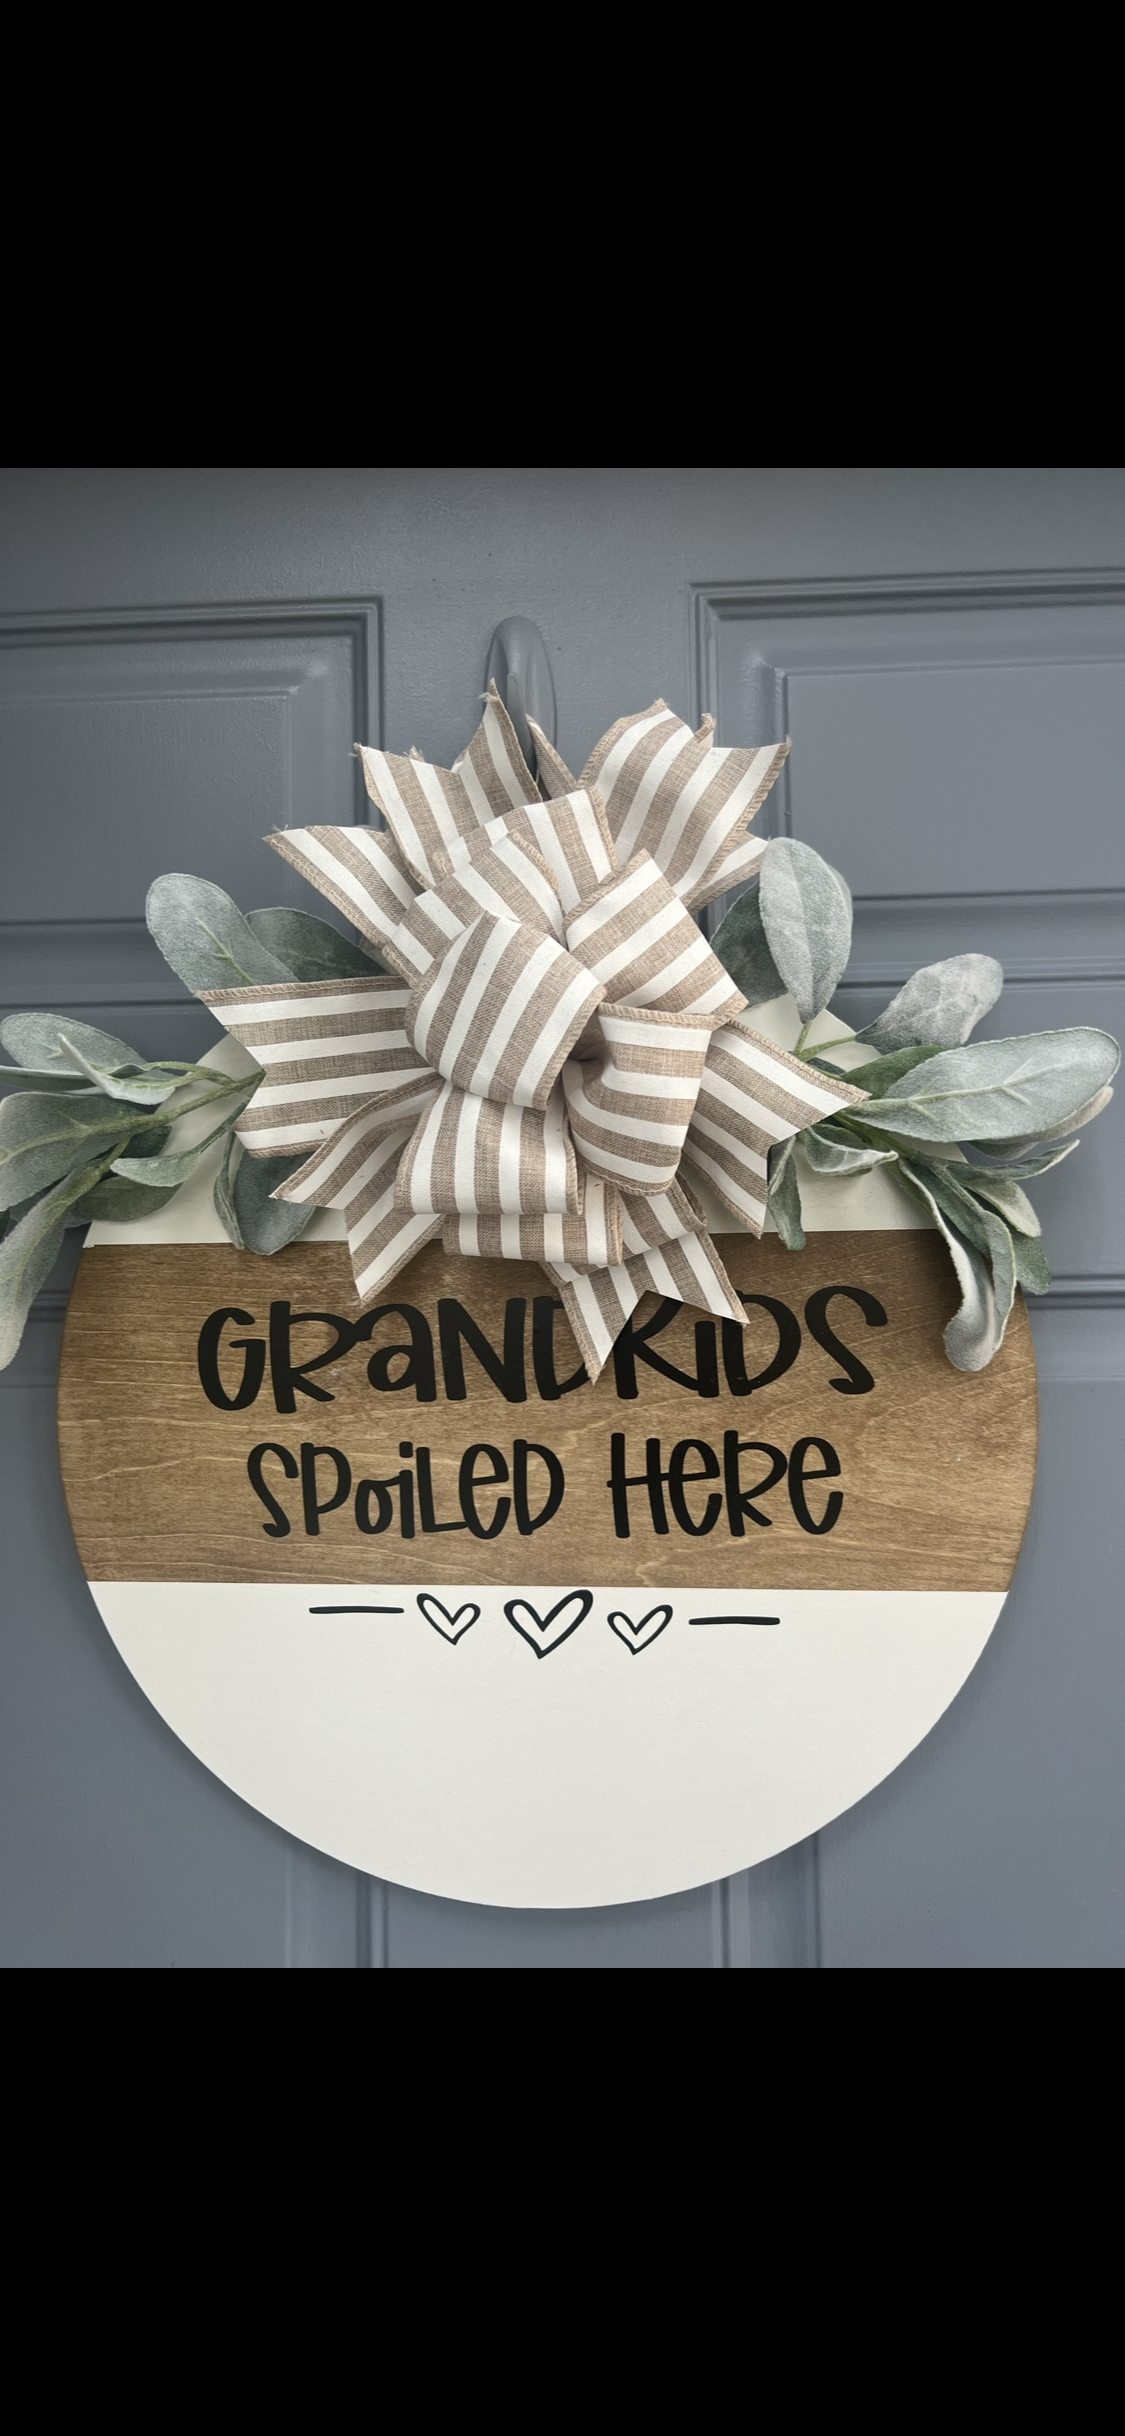 Grandkids Spoiled Here - Willow Love Bug Designs 